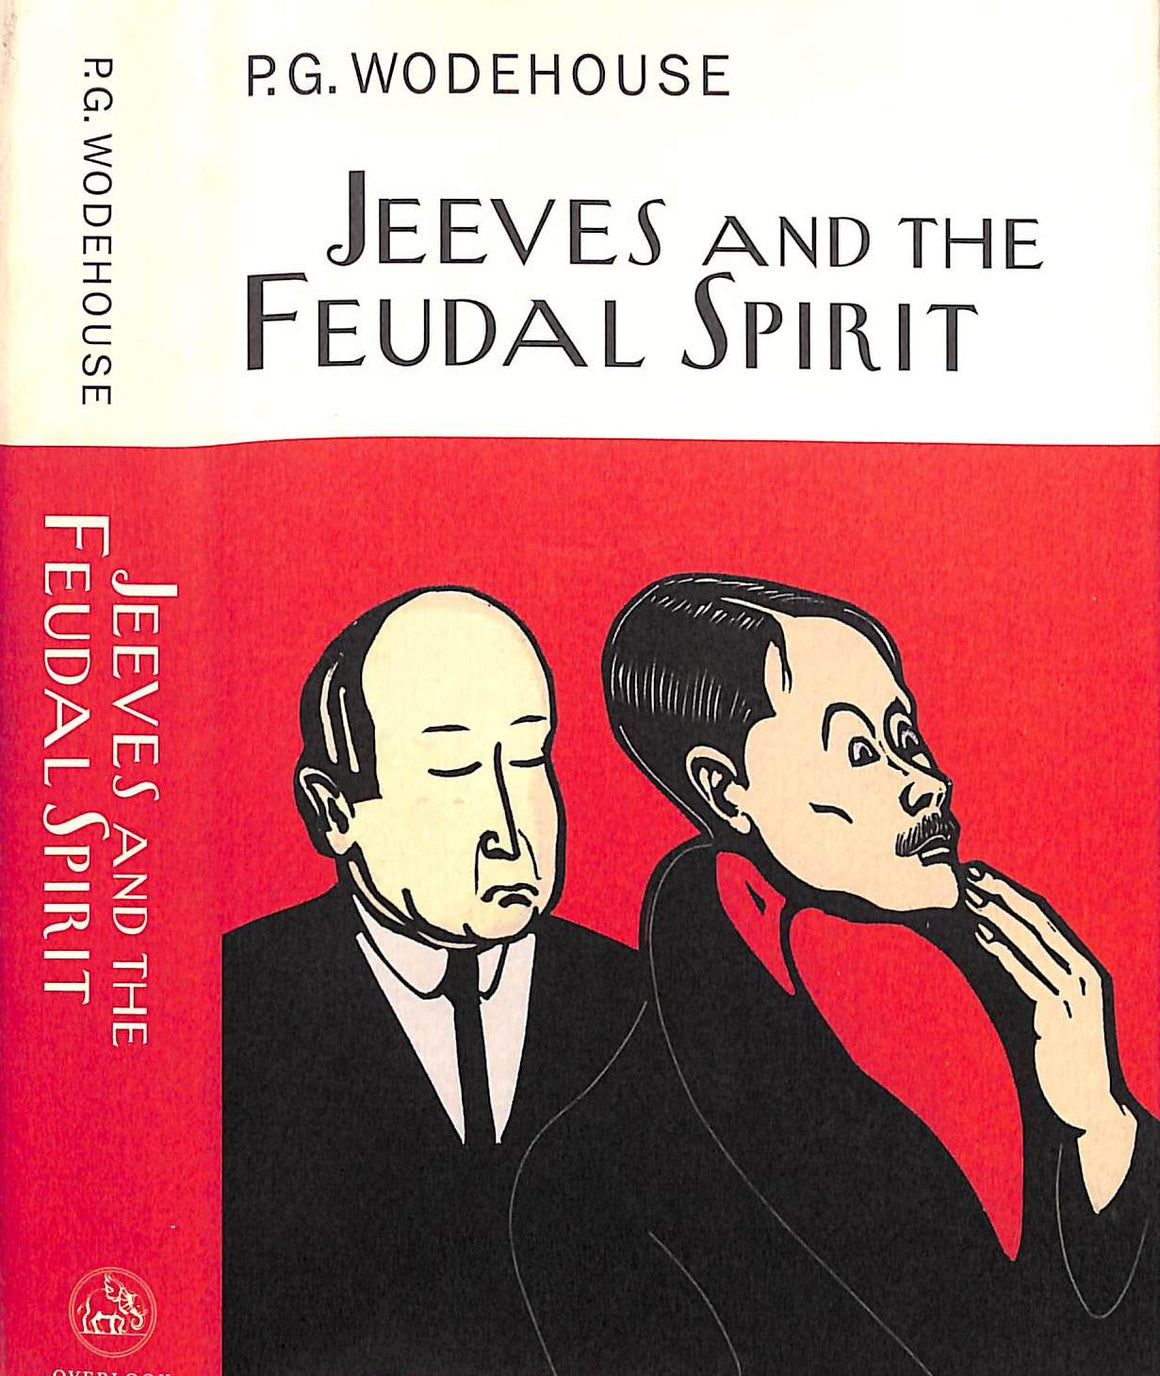 "Jeeves And The Feudal Spirit" 2001 WODEHOUSE, P.G.